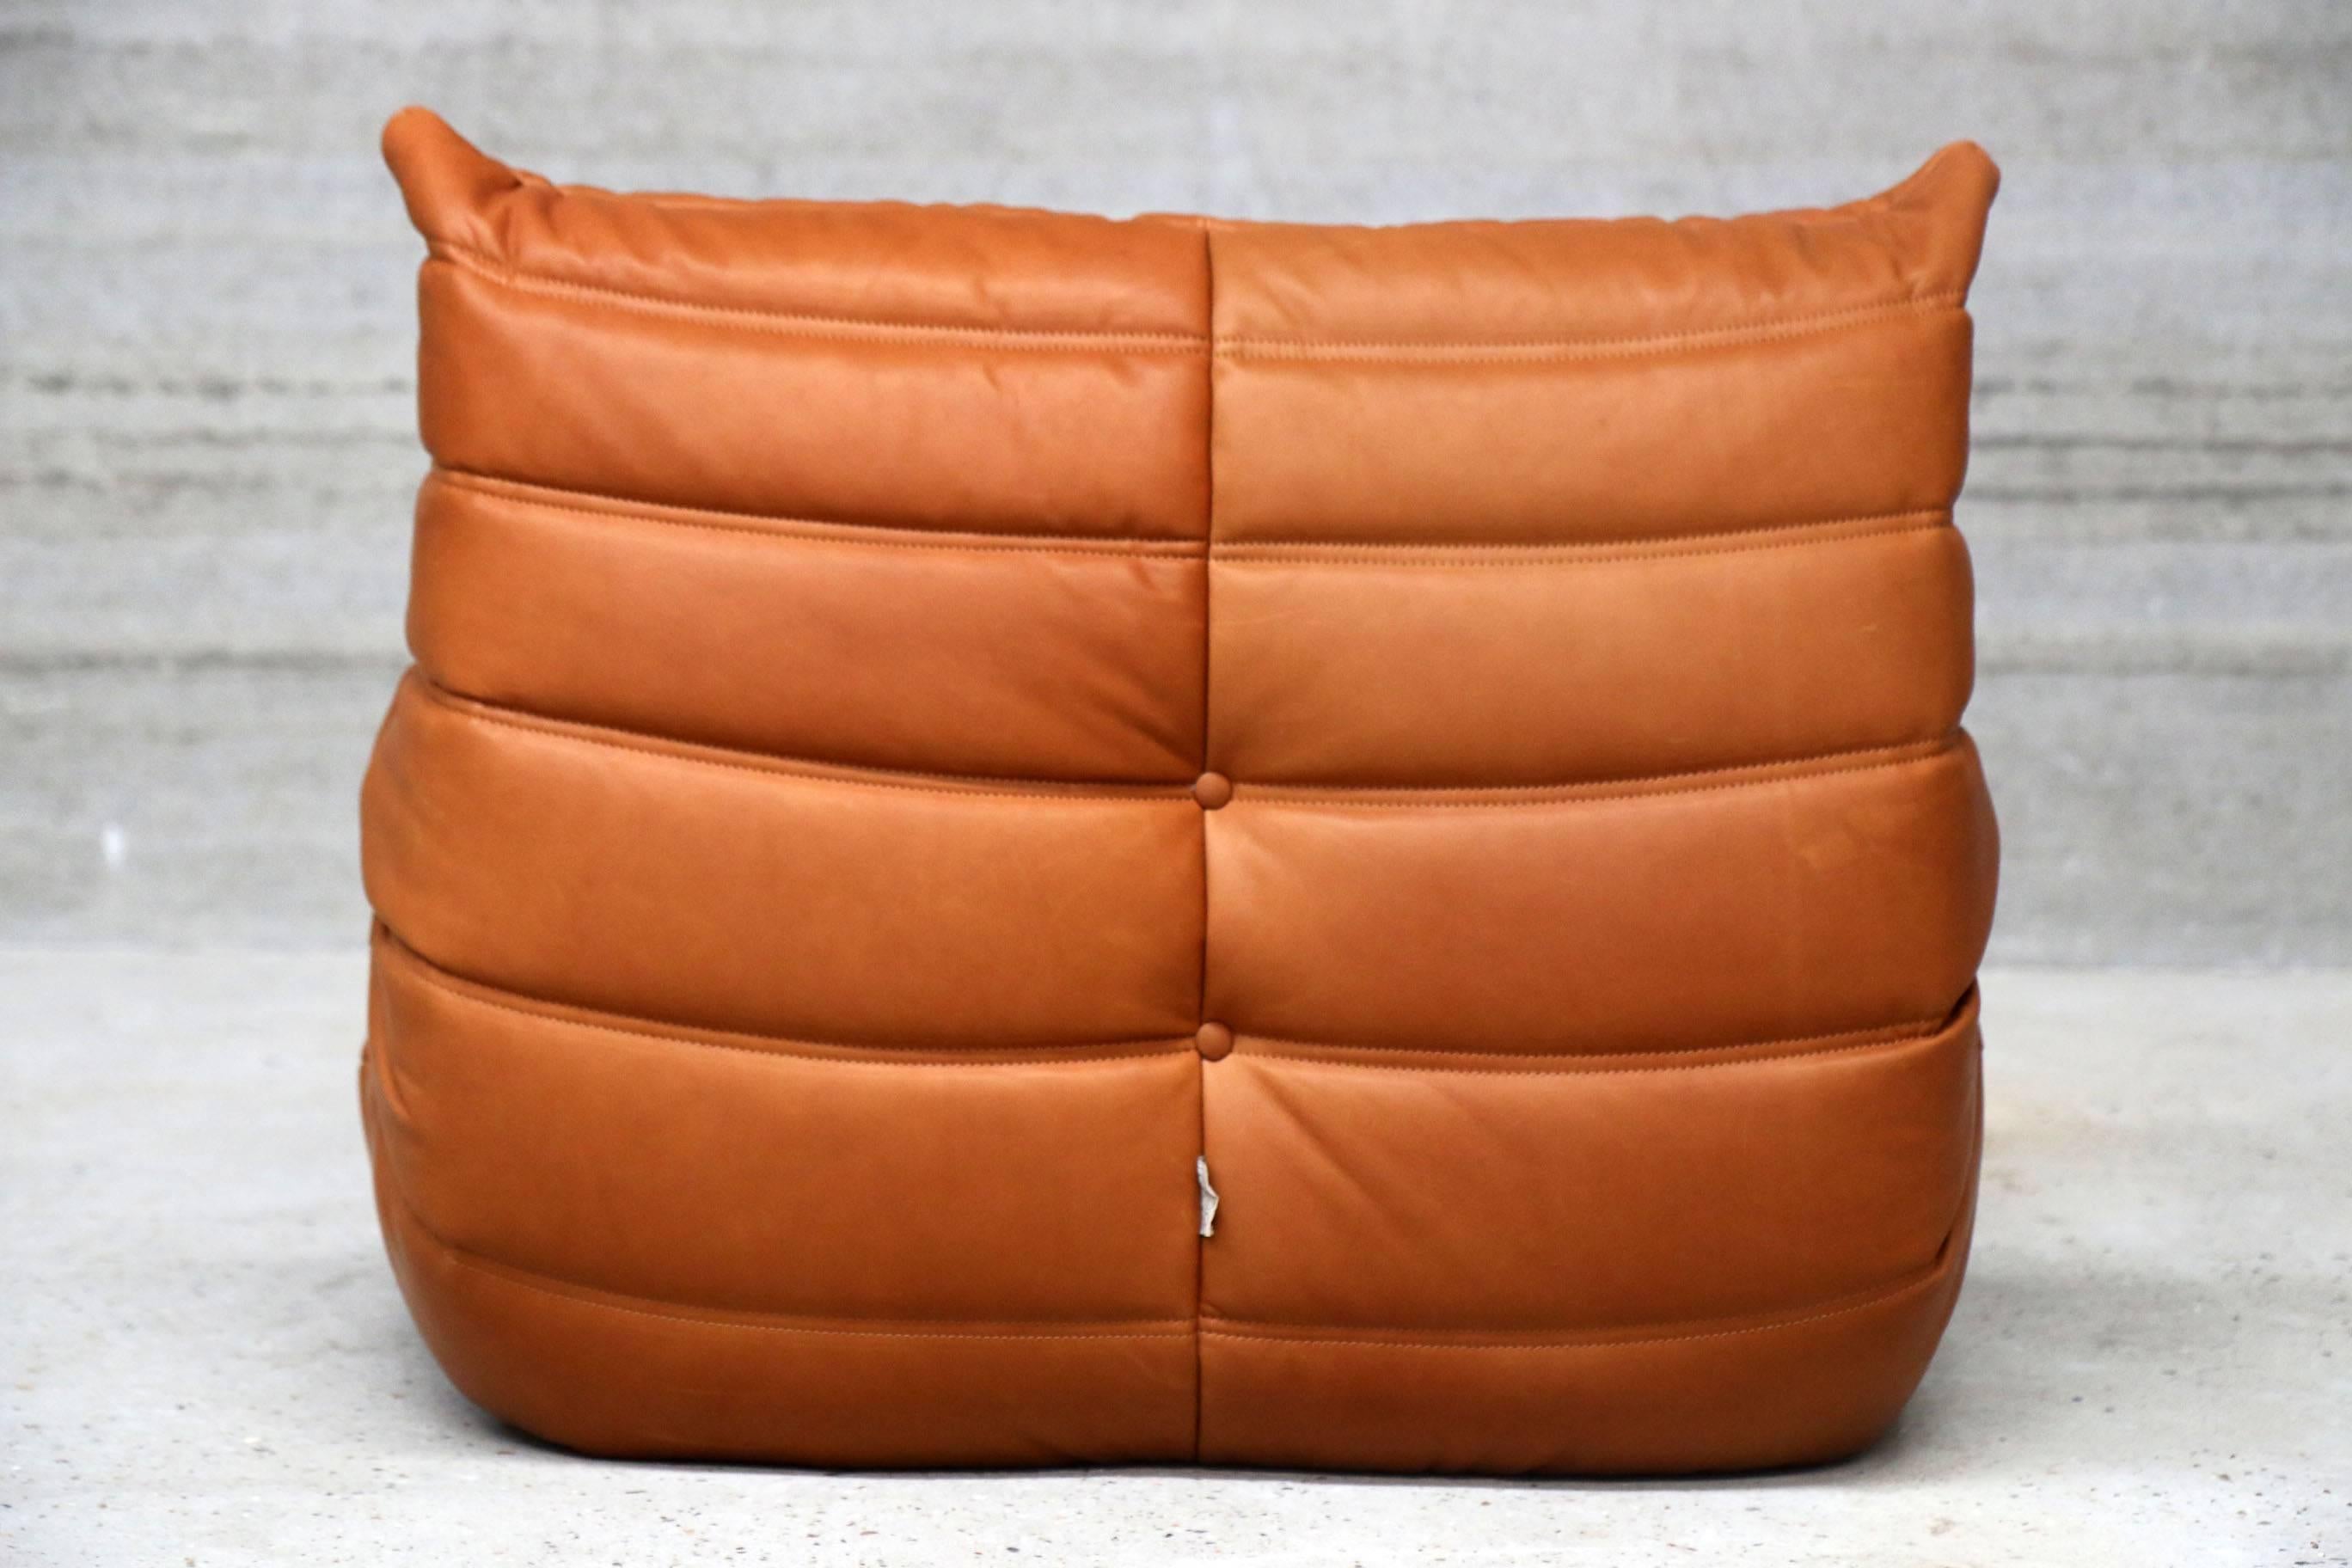 Pair of Vintage Ligne Roset Togo Leather Lounge Chairs with Pouf, France 1